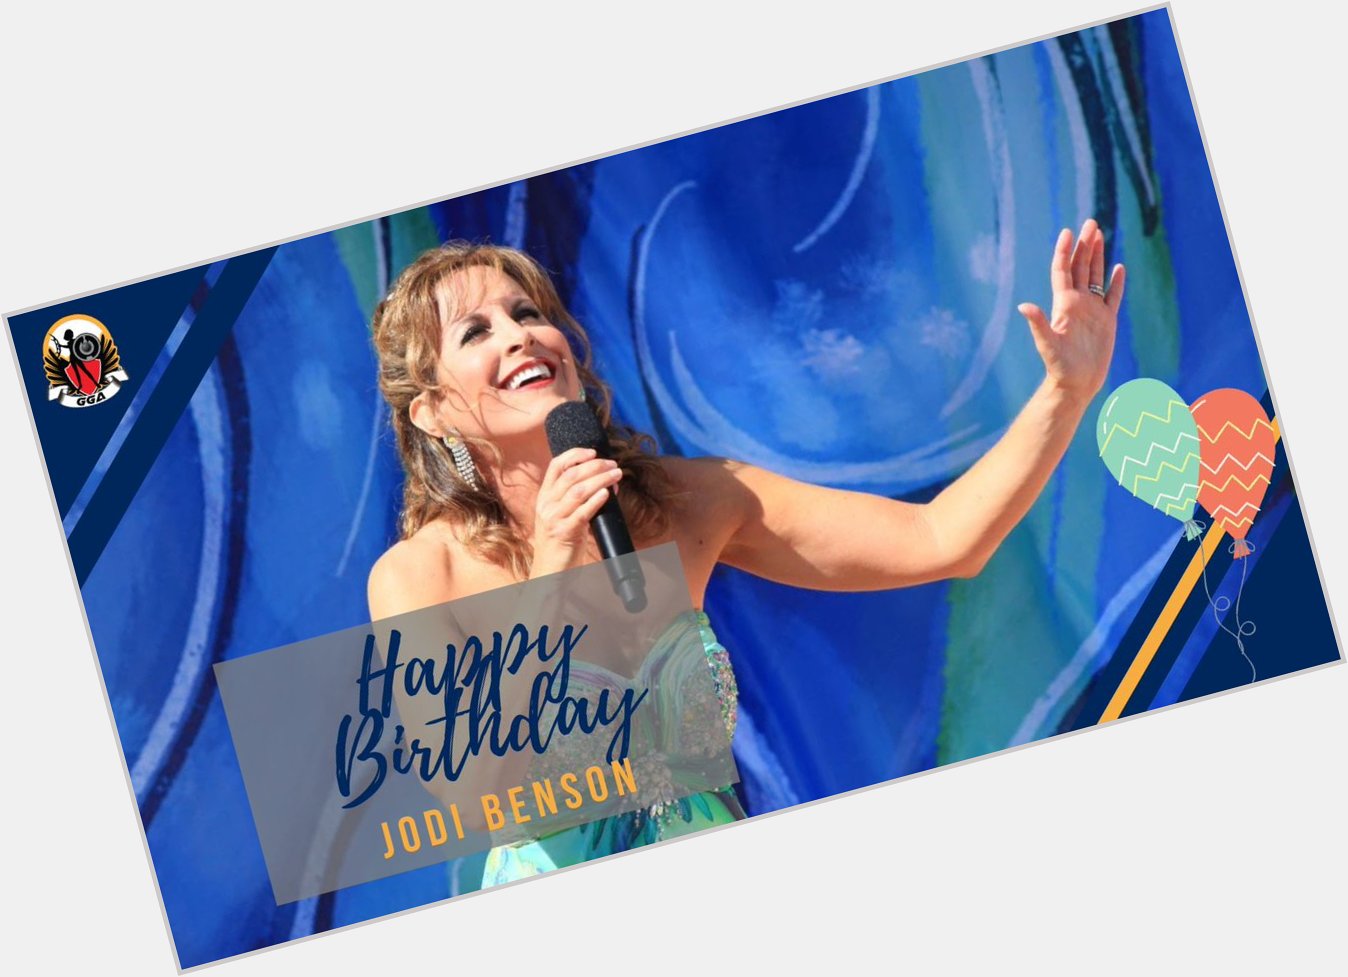 Happy Birthday, Jodi Benson!  What role of hers is your favorite?  